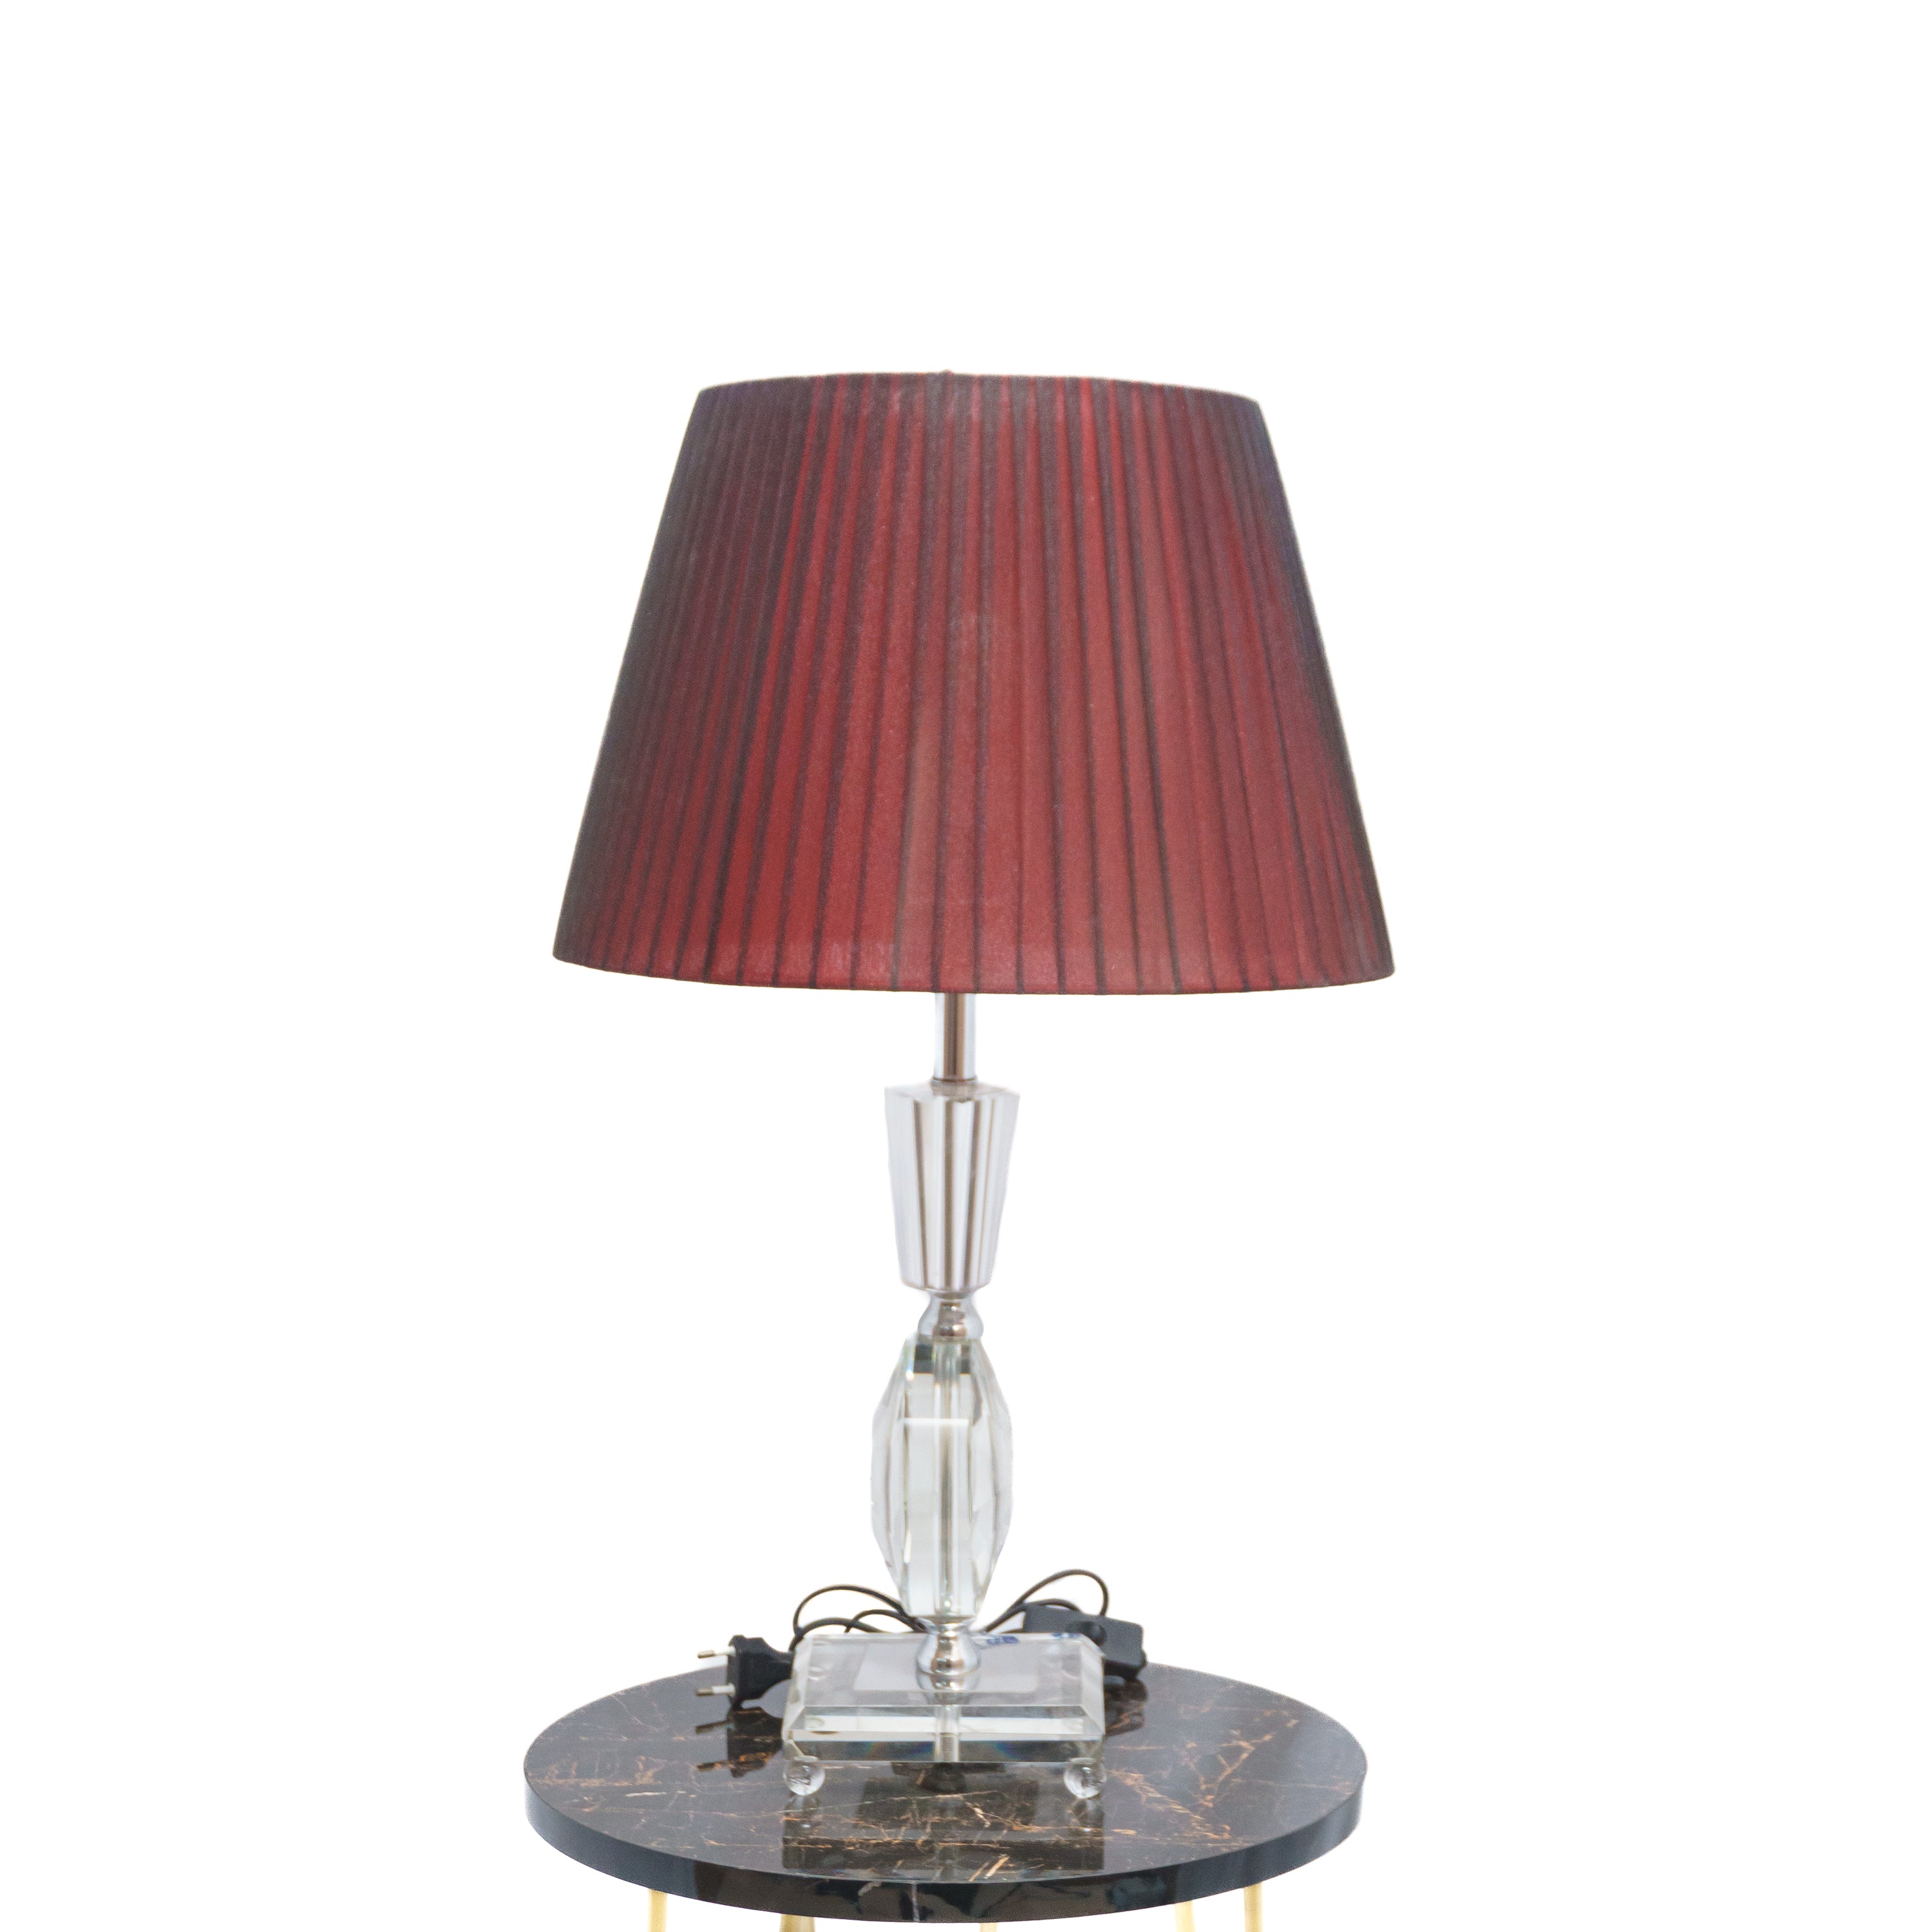 Maroon Elegance Electric Table Lamp: Fabric Shade with White Crystal Lamp Stand and Base